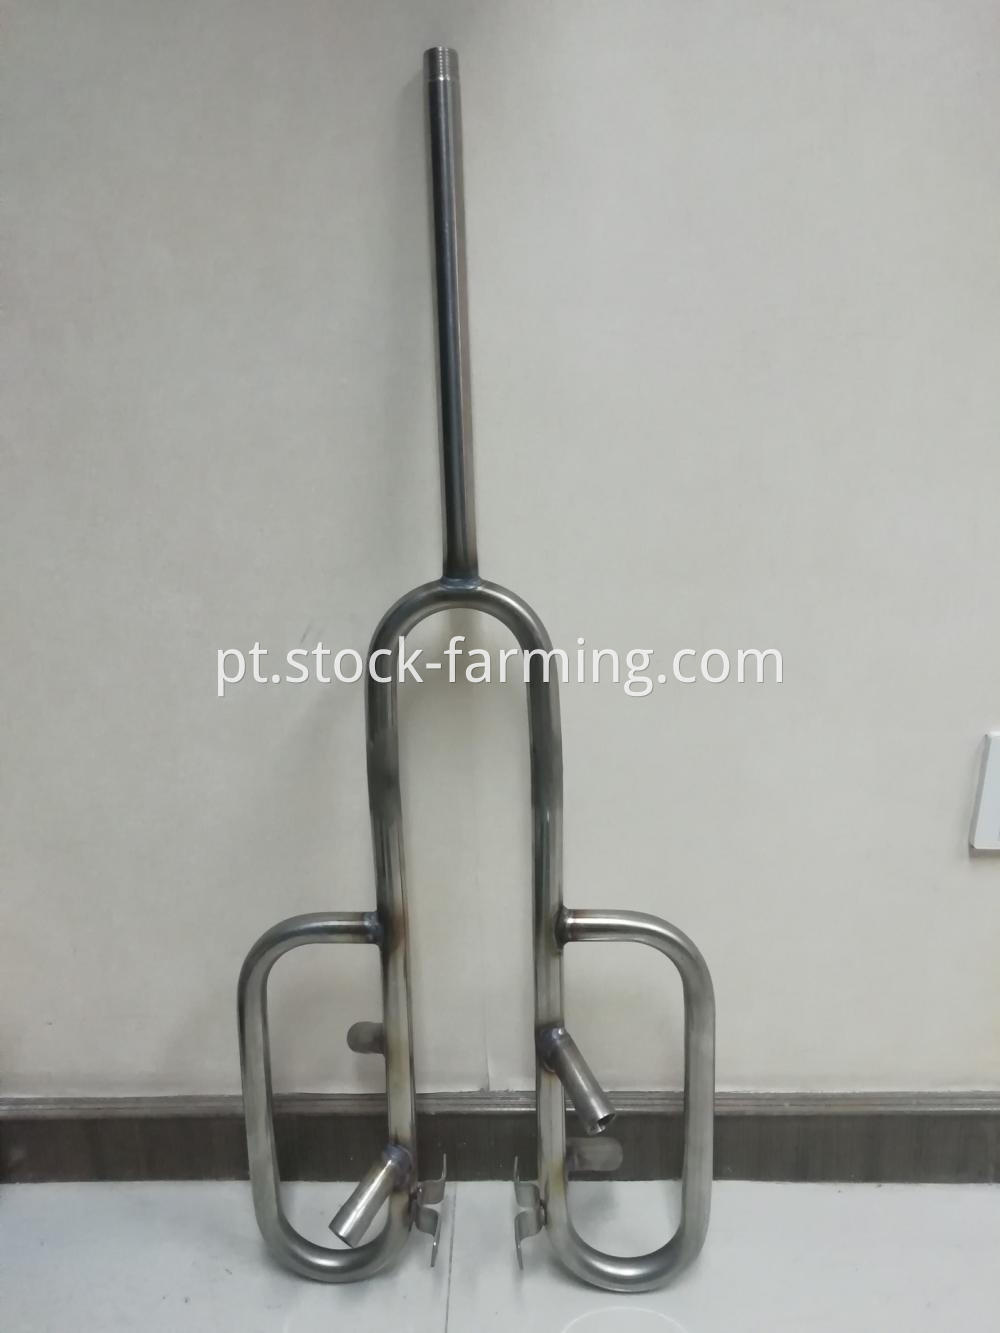 Stainless Steel Pipe For Pig